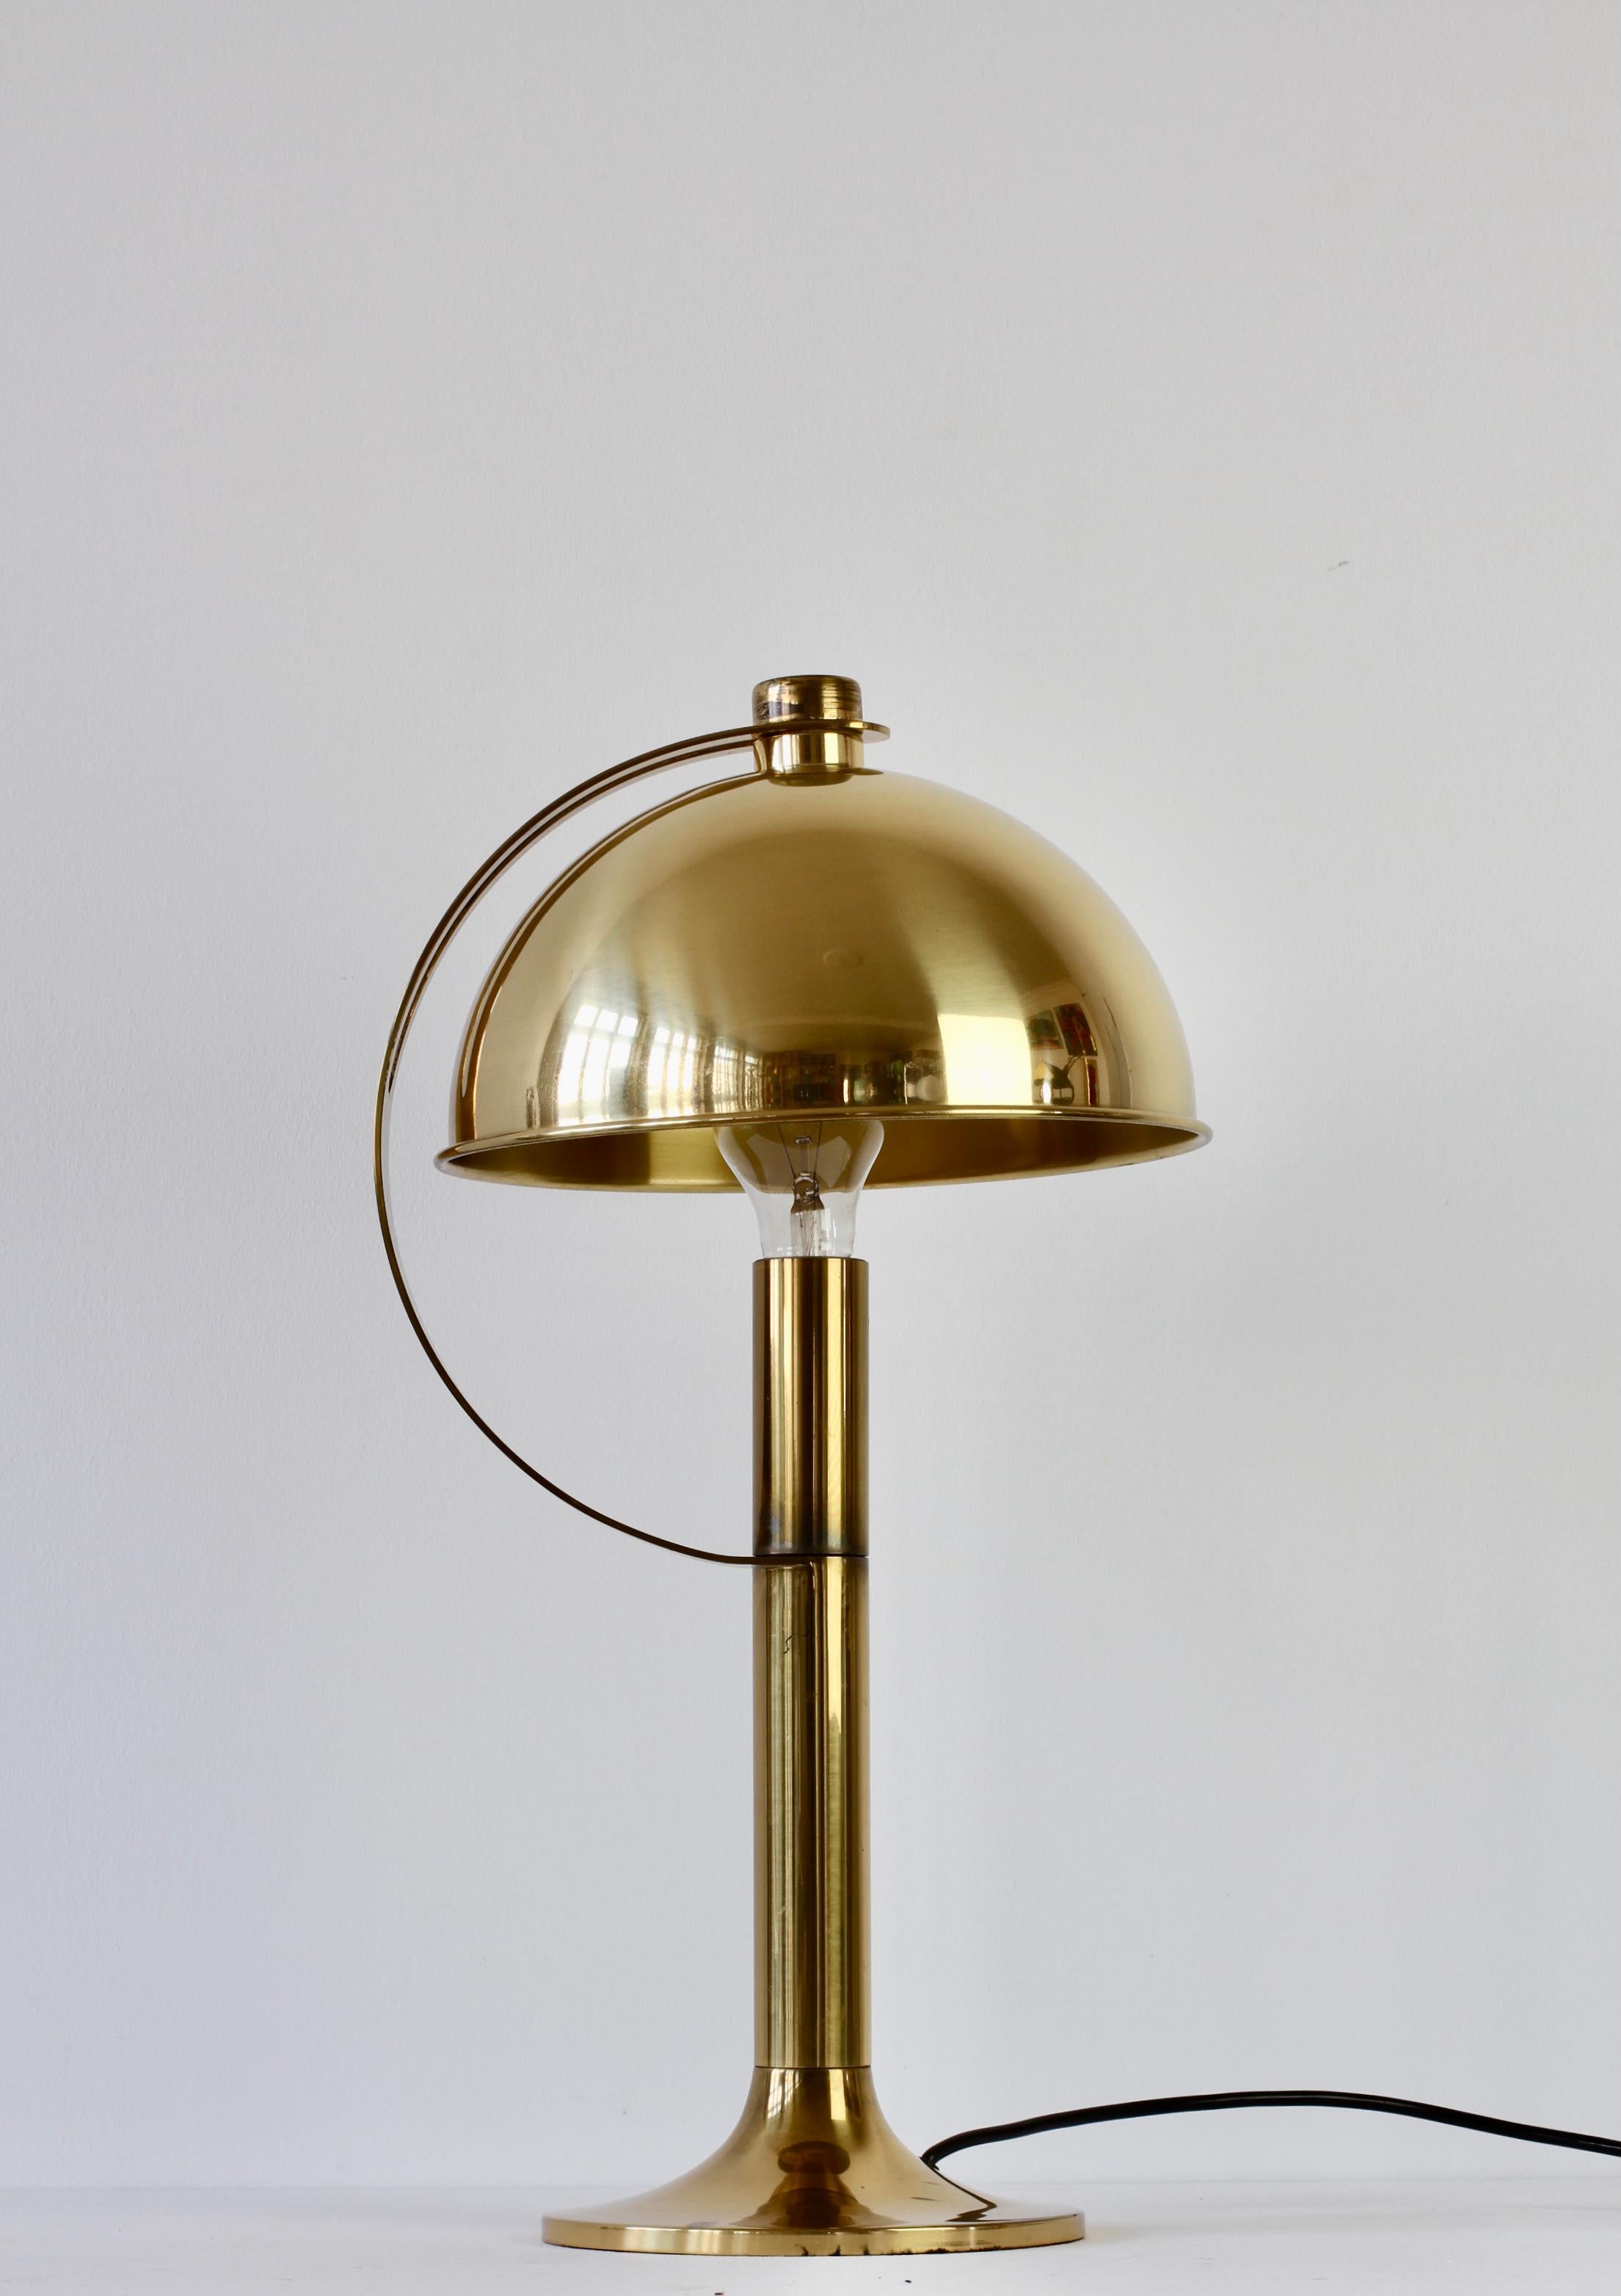 Rare Mid-Century Modern vintage German made table lamp or desk light by Florian Schulz circa 1970s. Featuring polished brass hardware (now with age related patina) and an adjustable round brass shade making this the perfect modernist style reading